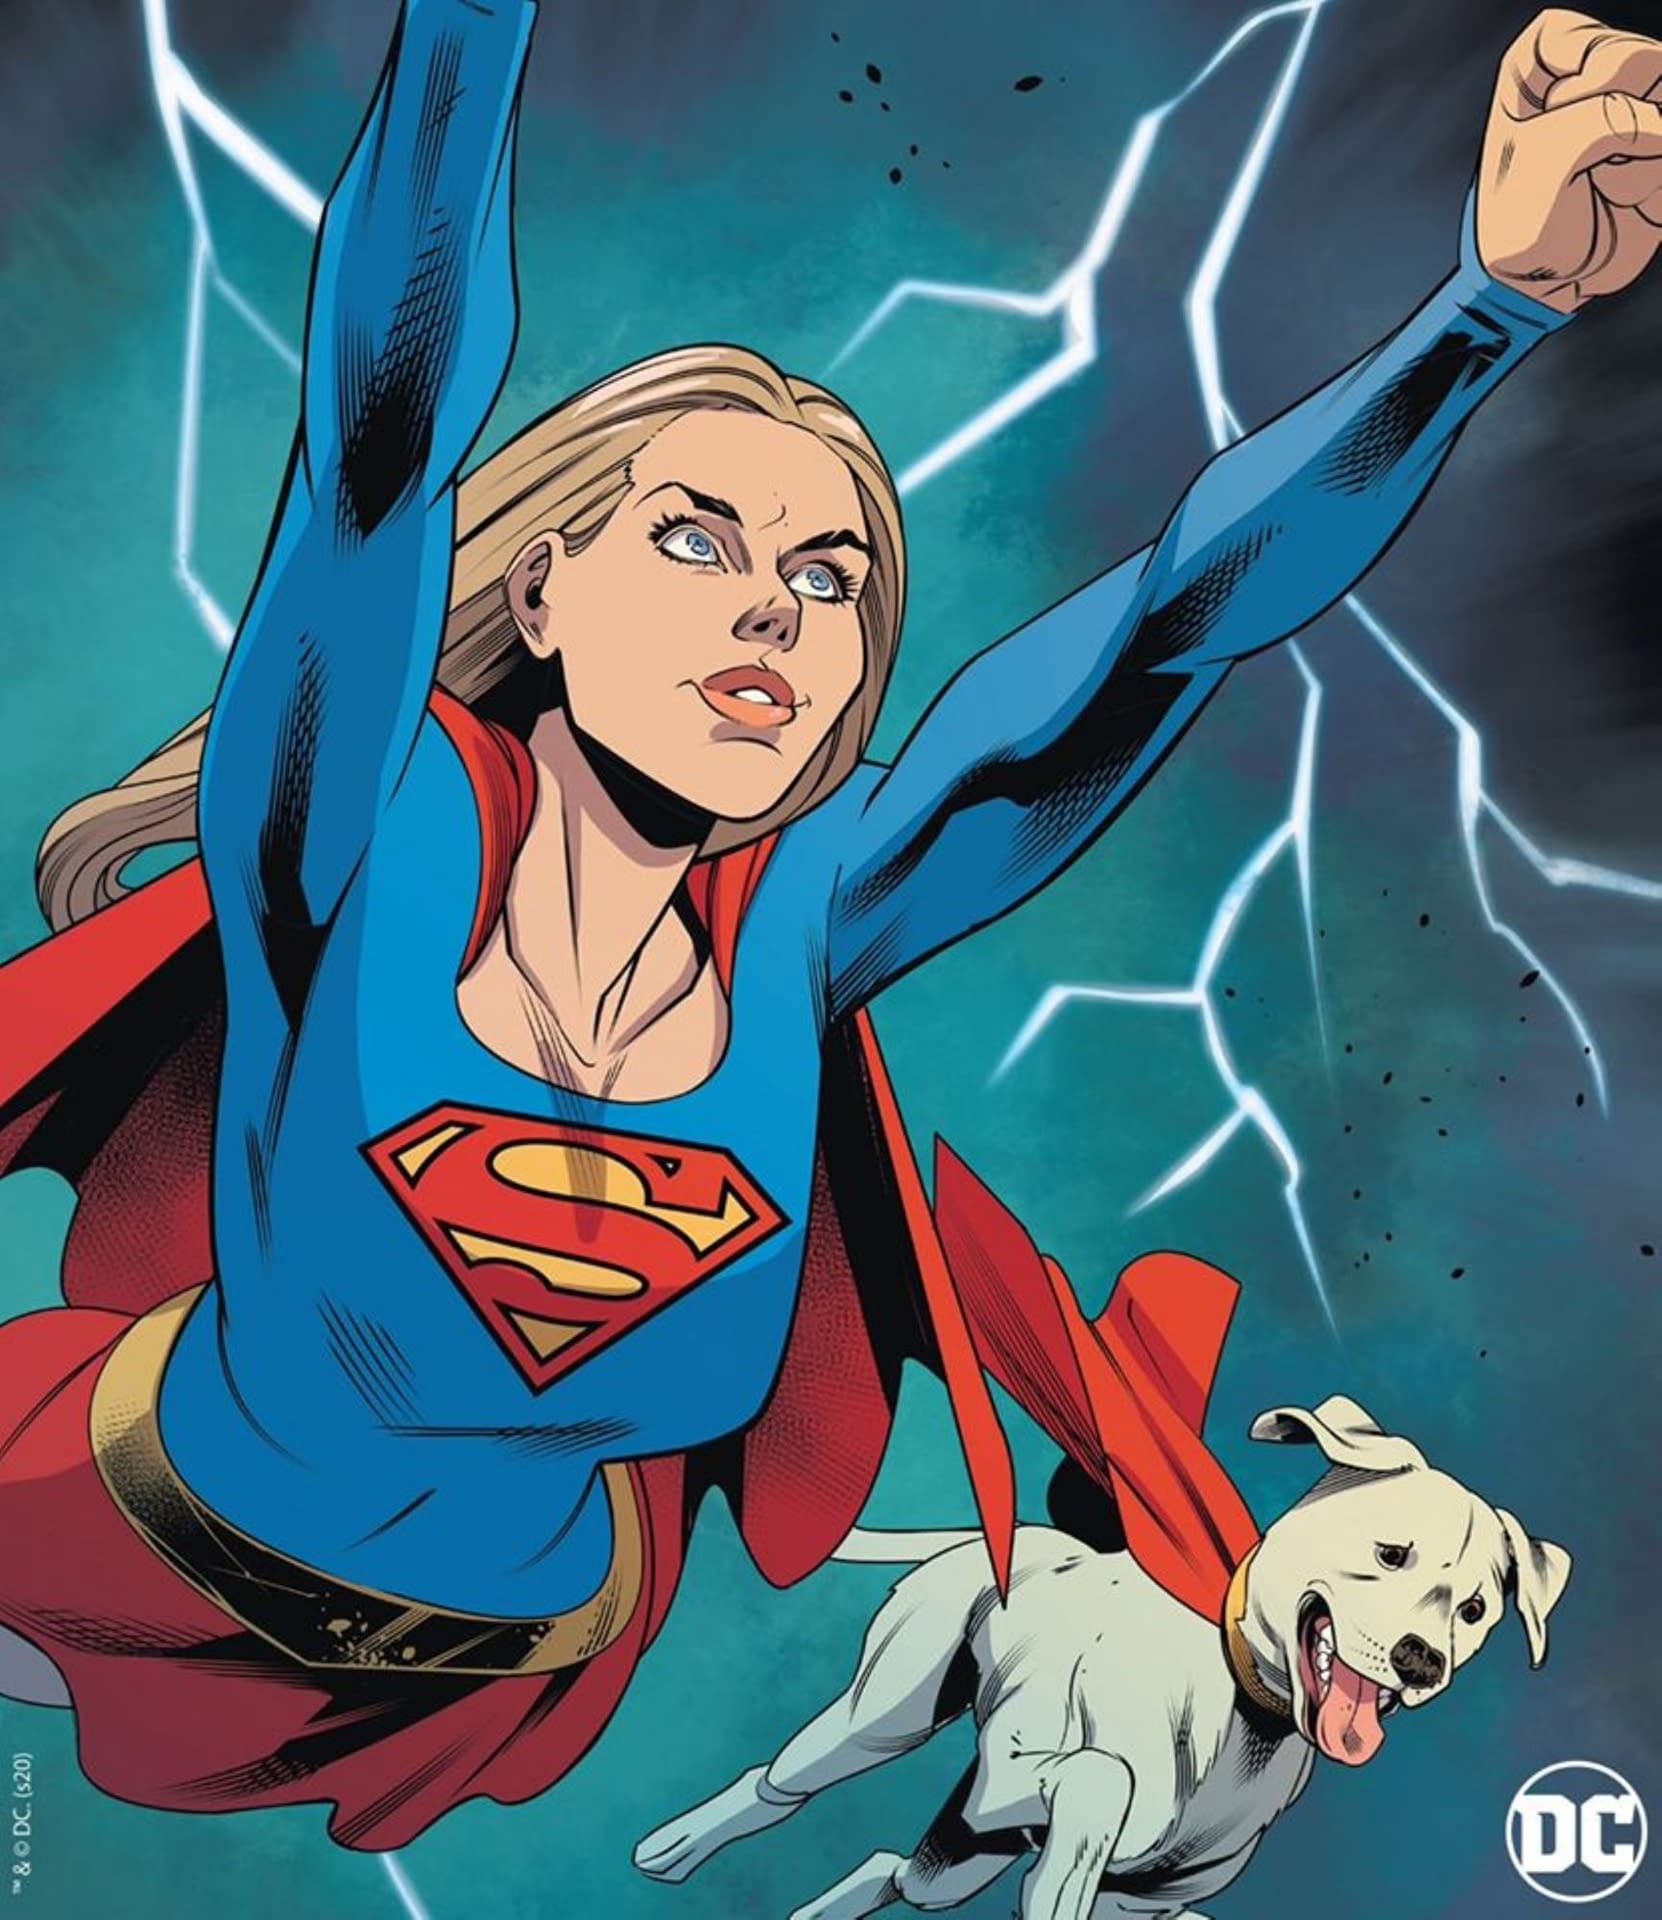 DC Comics Ask What Readers Thought Of Supergirl Finale...